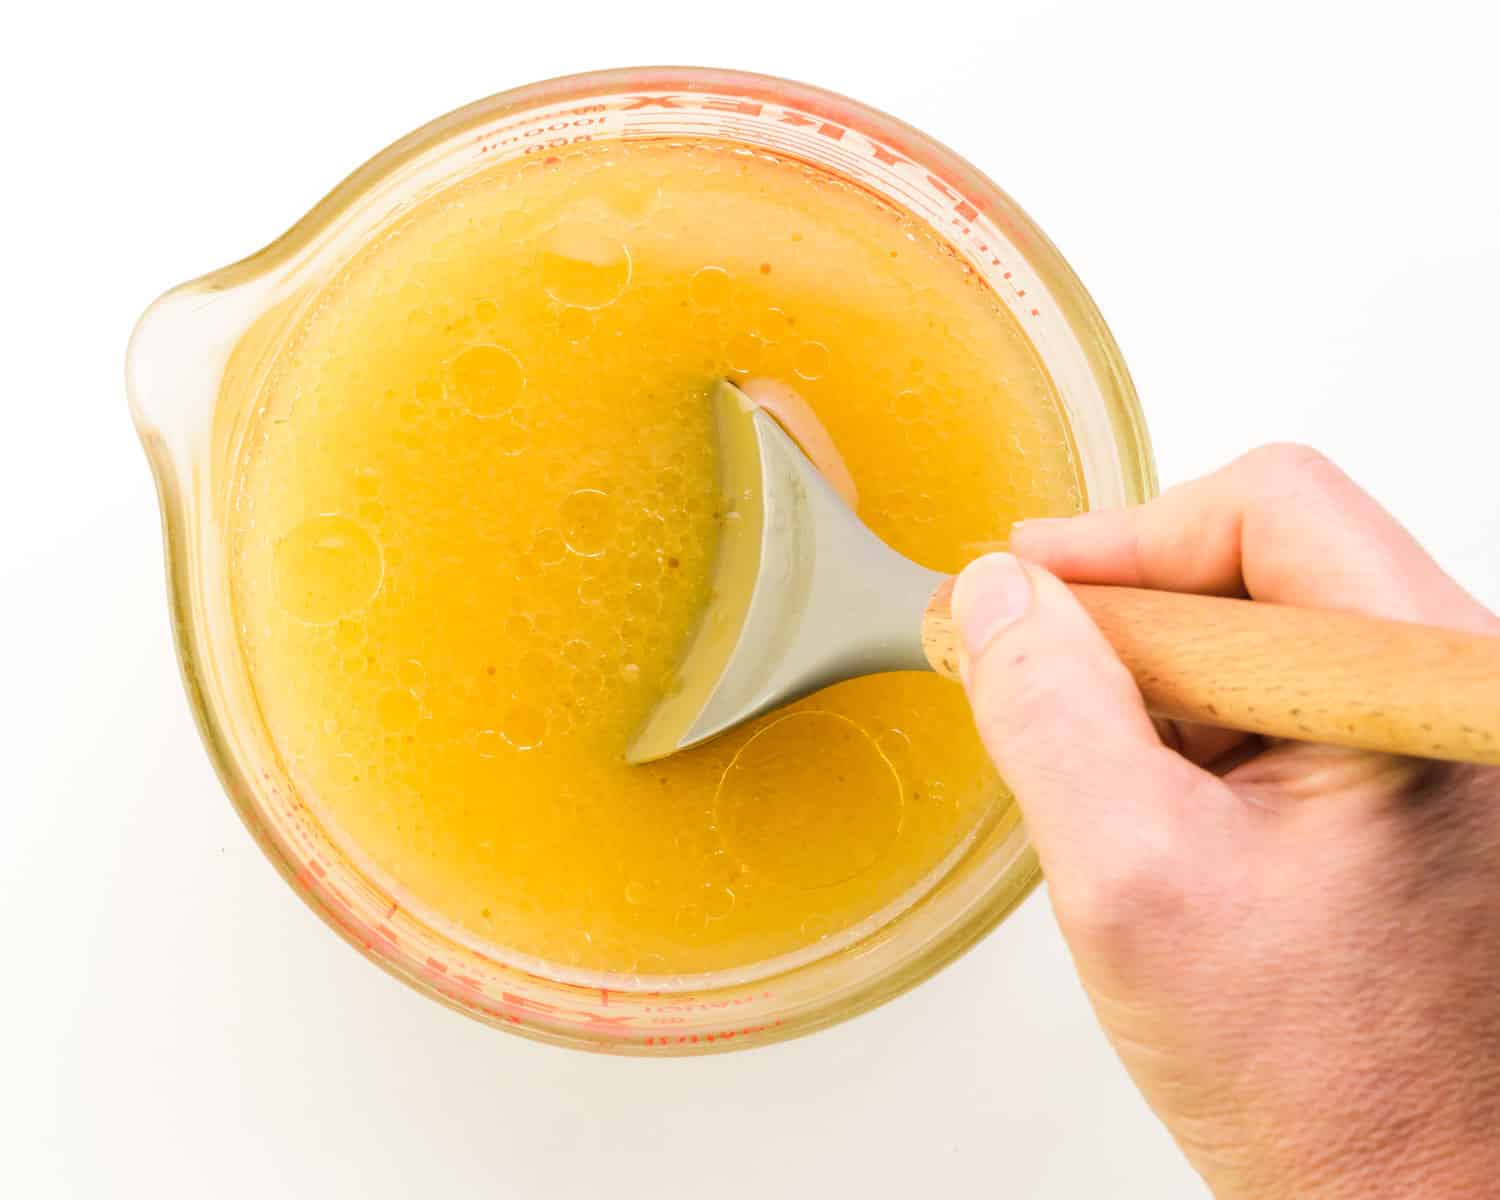 A hand holds a spatula, stirring a mixture of water, applesauce and other ingredients.